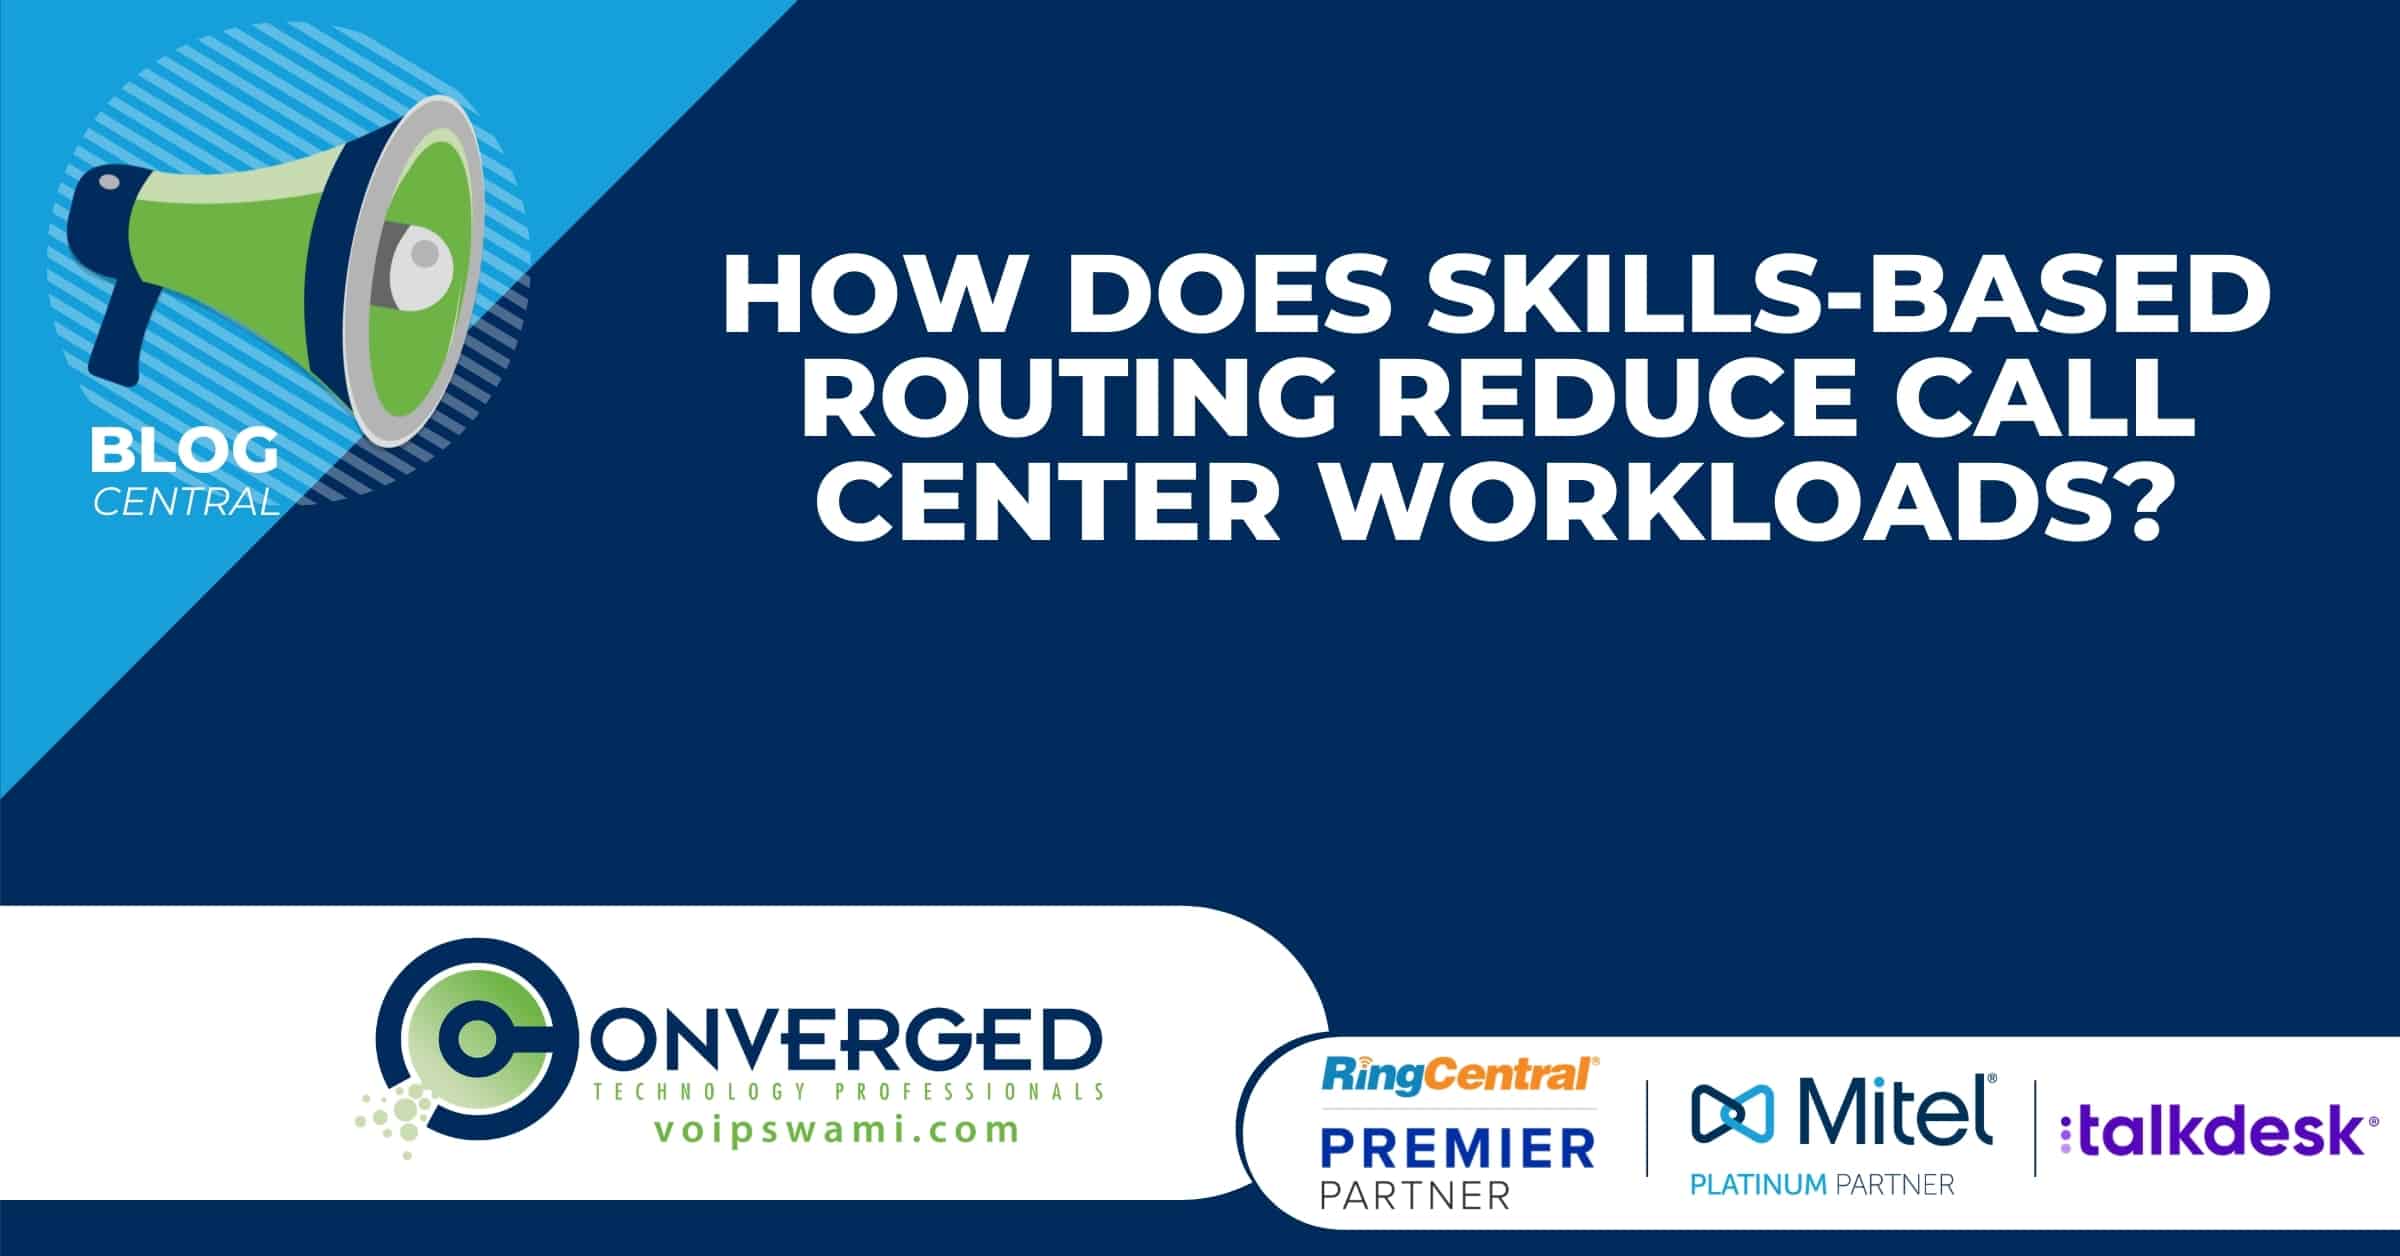 How Does Skills-Based Routing Reduce Call Center Workloads